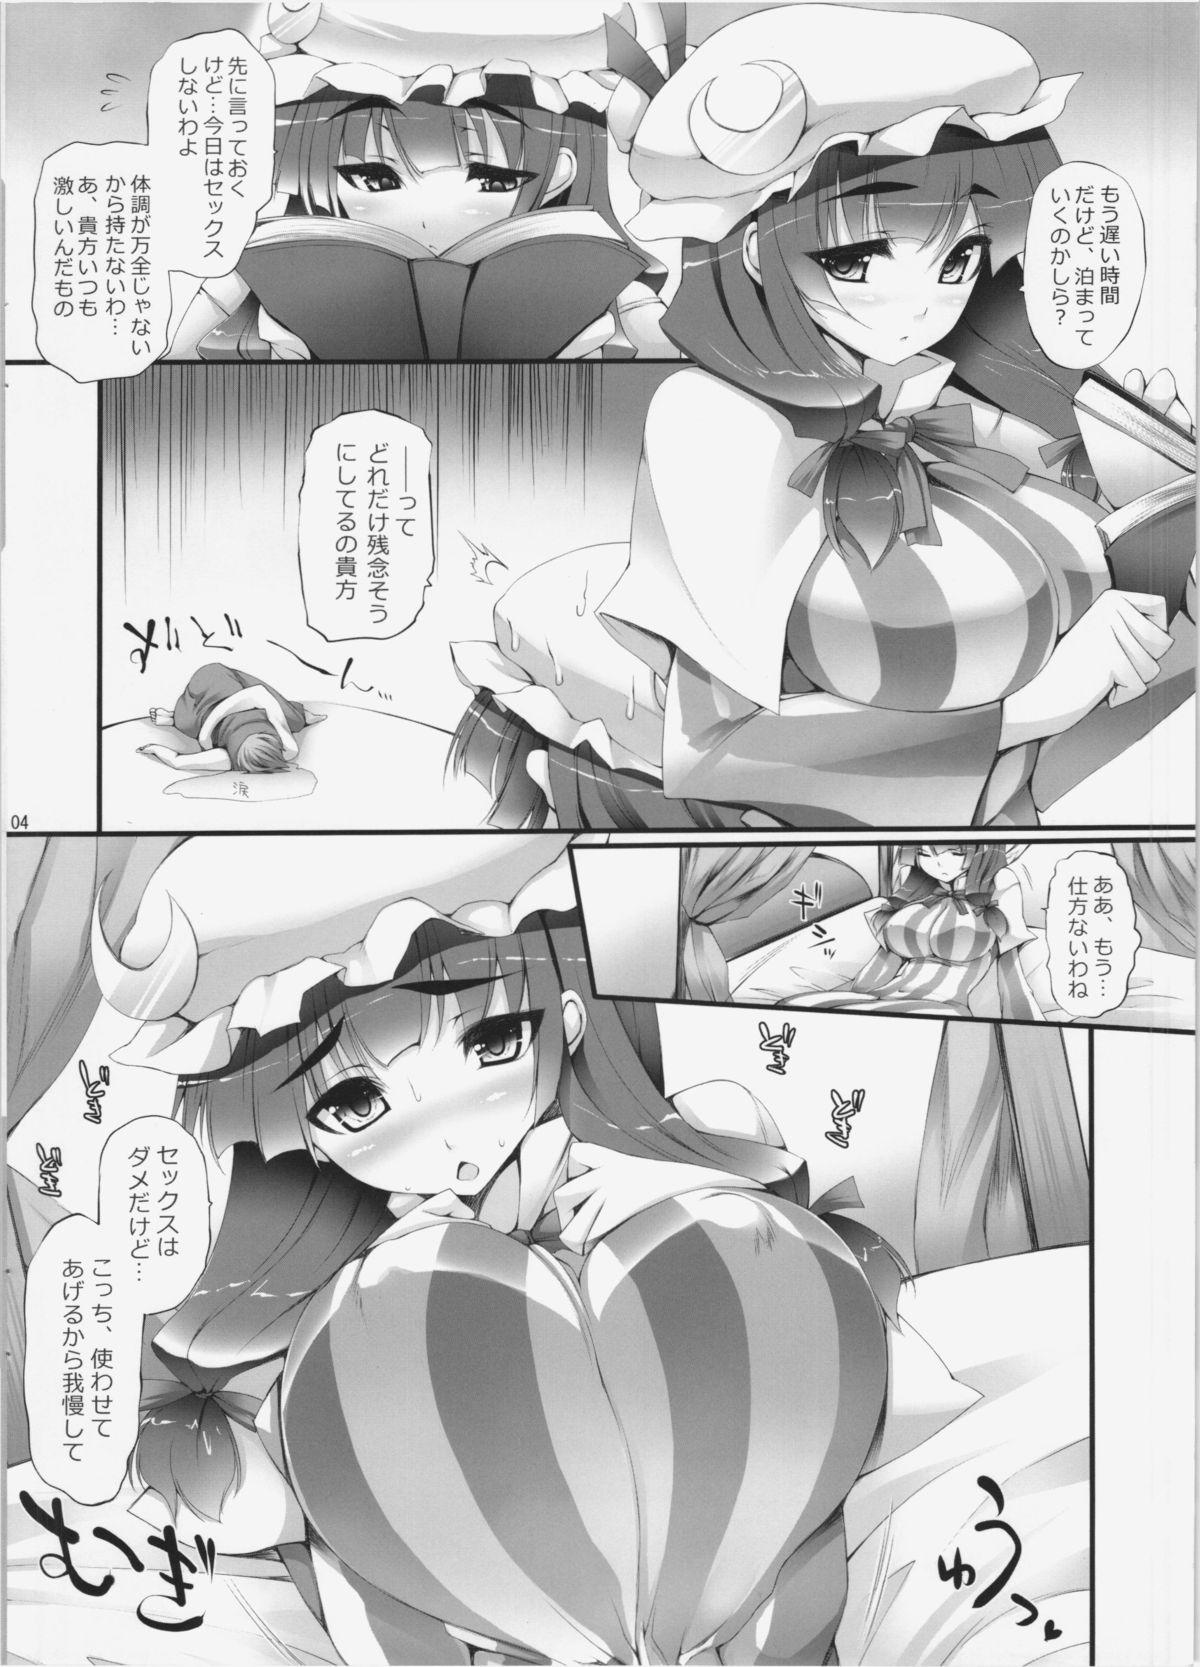 Longhair Inter Mammary 3 - Touhou project Love - Page 3